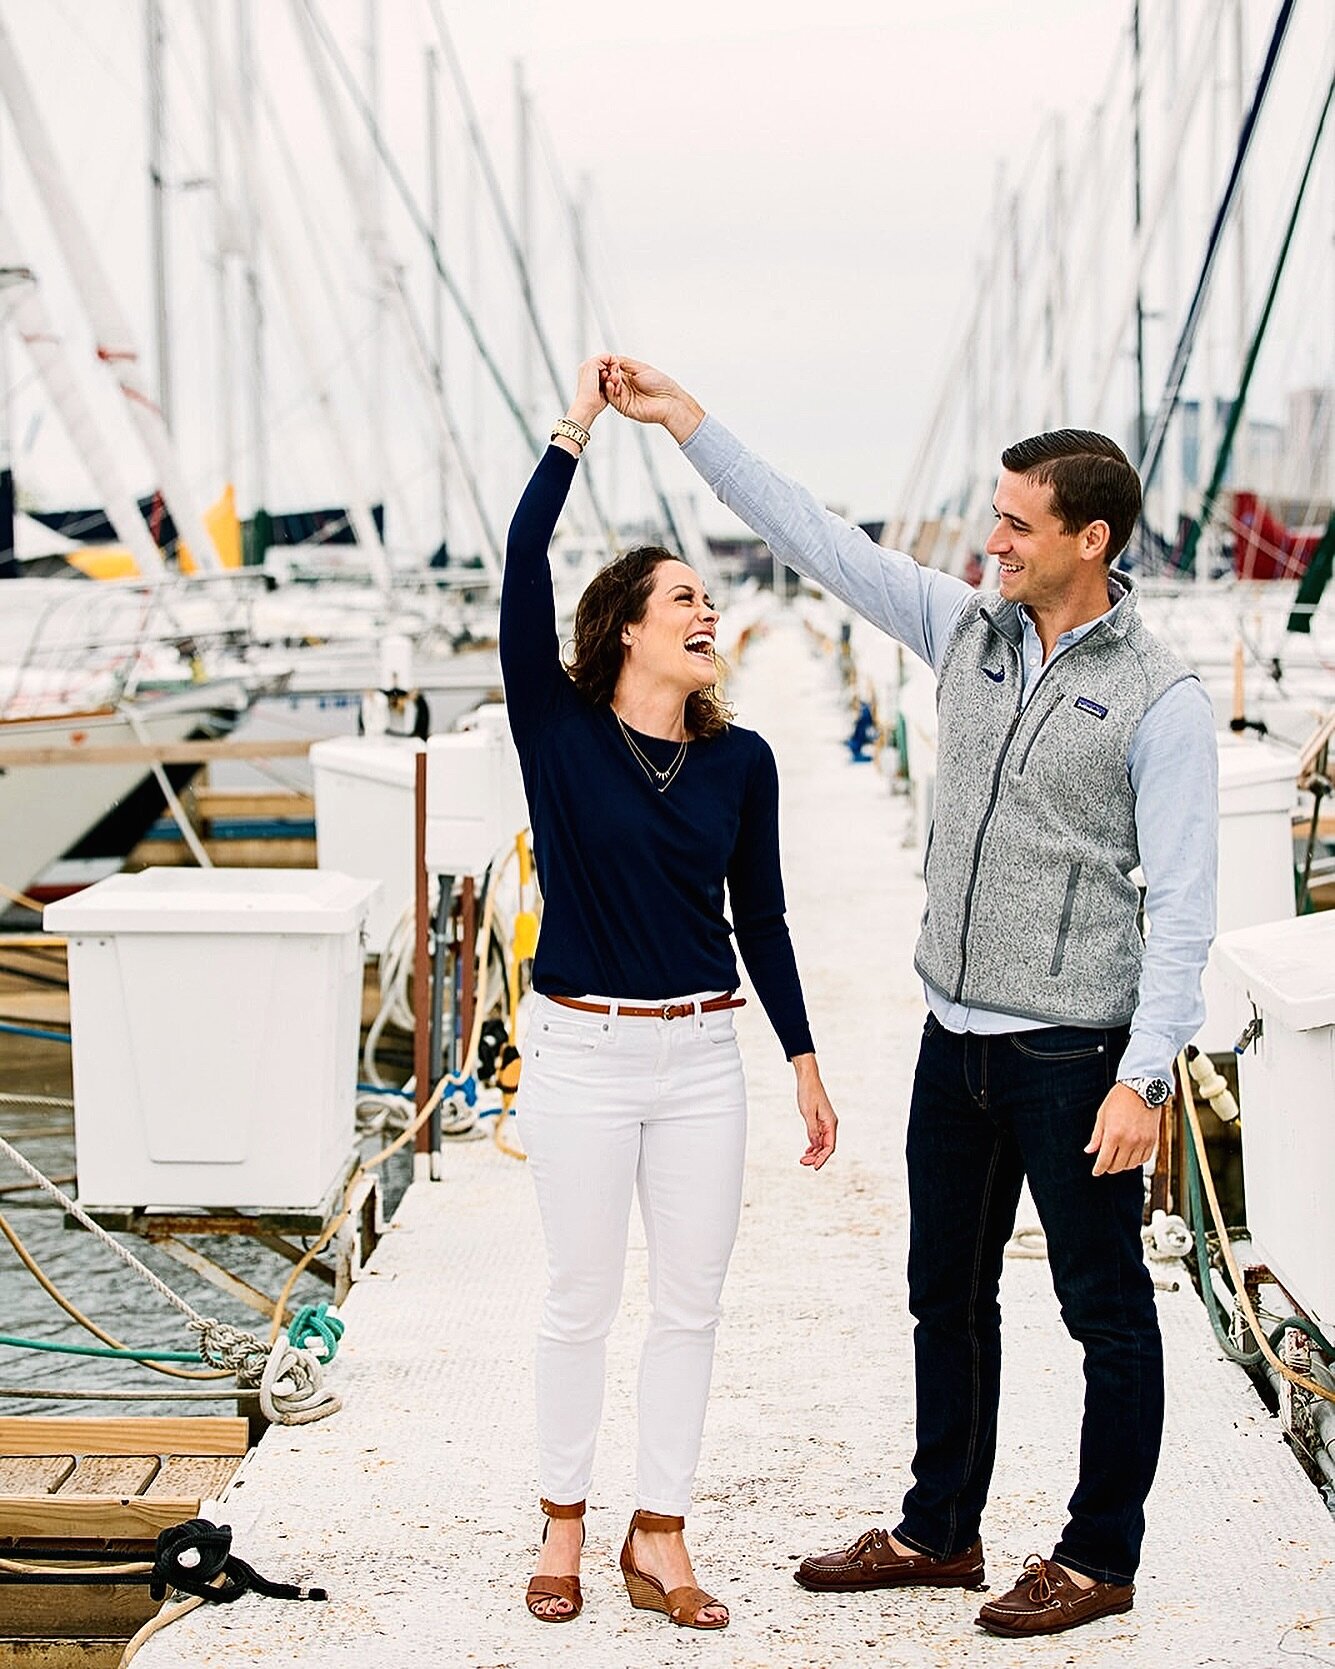 Spending the weekend near the shore and reminiscing this sweet nautical engagement session. 

#nauticalengagement #engagement #engagementphotos #engagementsession #pittsburghphotographer #pittsburghweddingphotographer #pittsburghengagement #cleveland